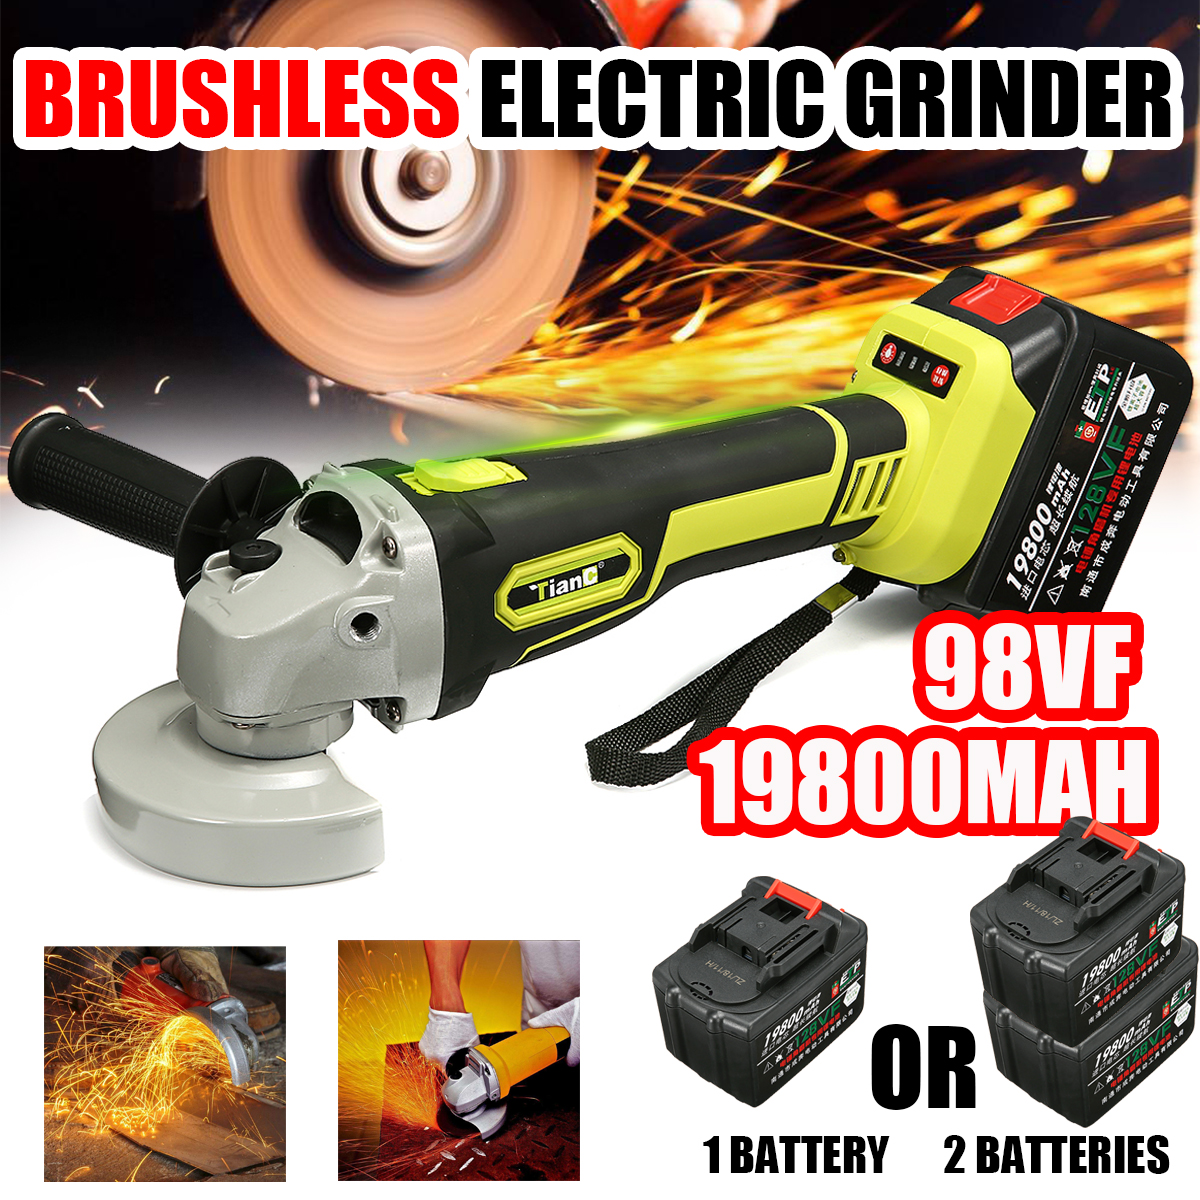 128VF-19800mAh-Lithium-Ion-Brushless-Cut-Off-Angle-Grinder-Cordless-Electric-Angle-Grinder-Power-Cut-1397283-4